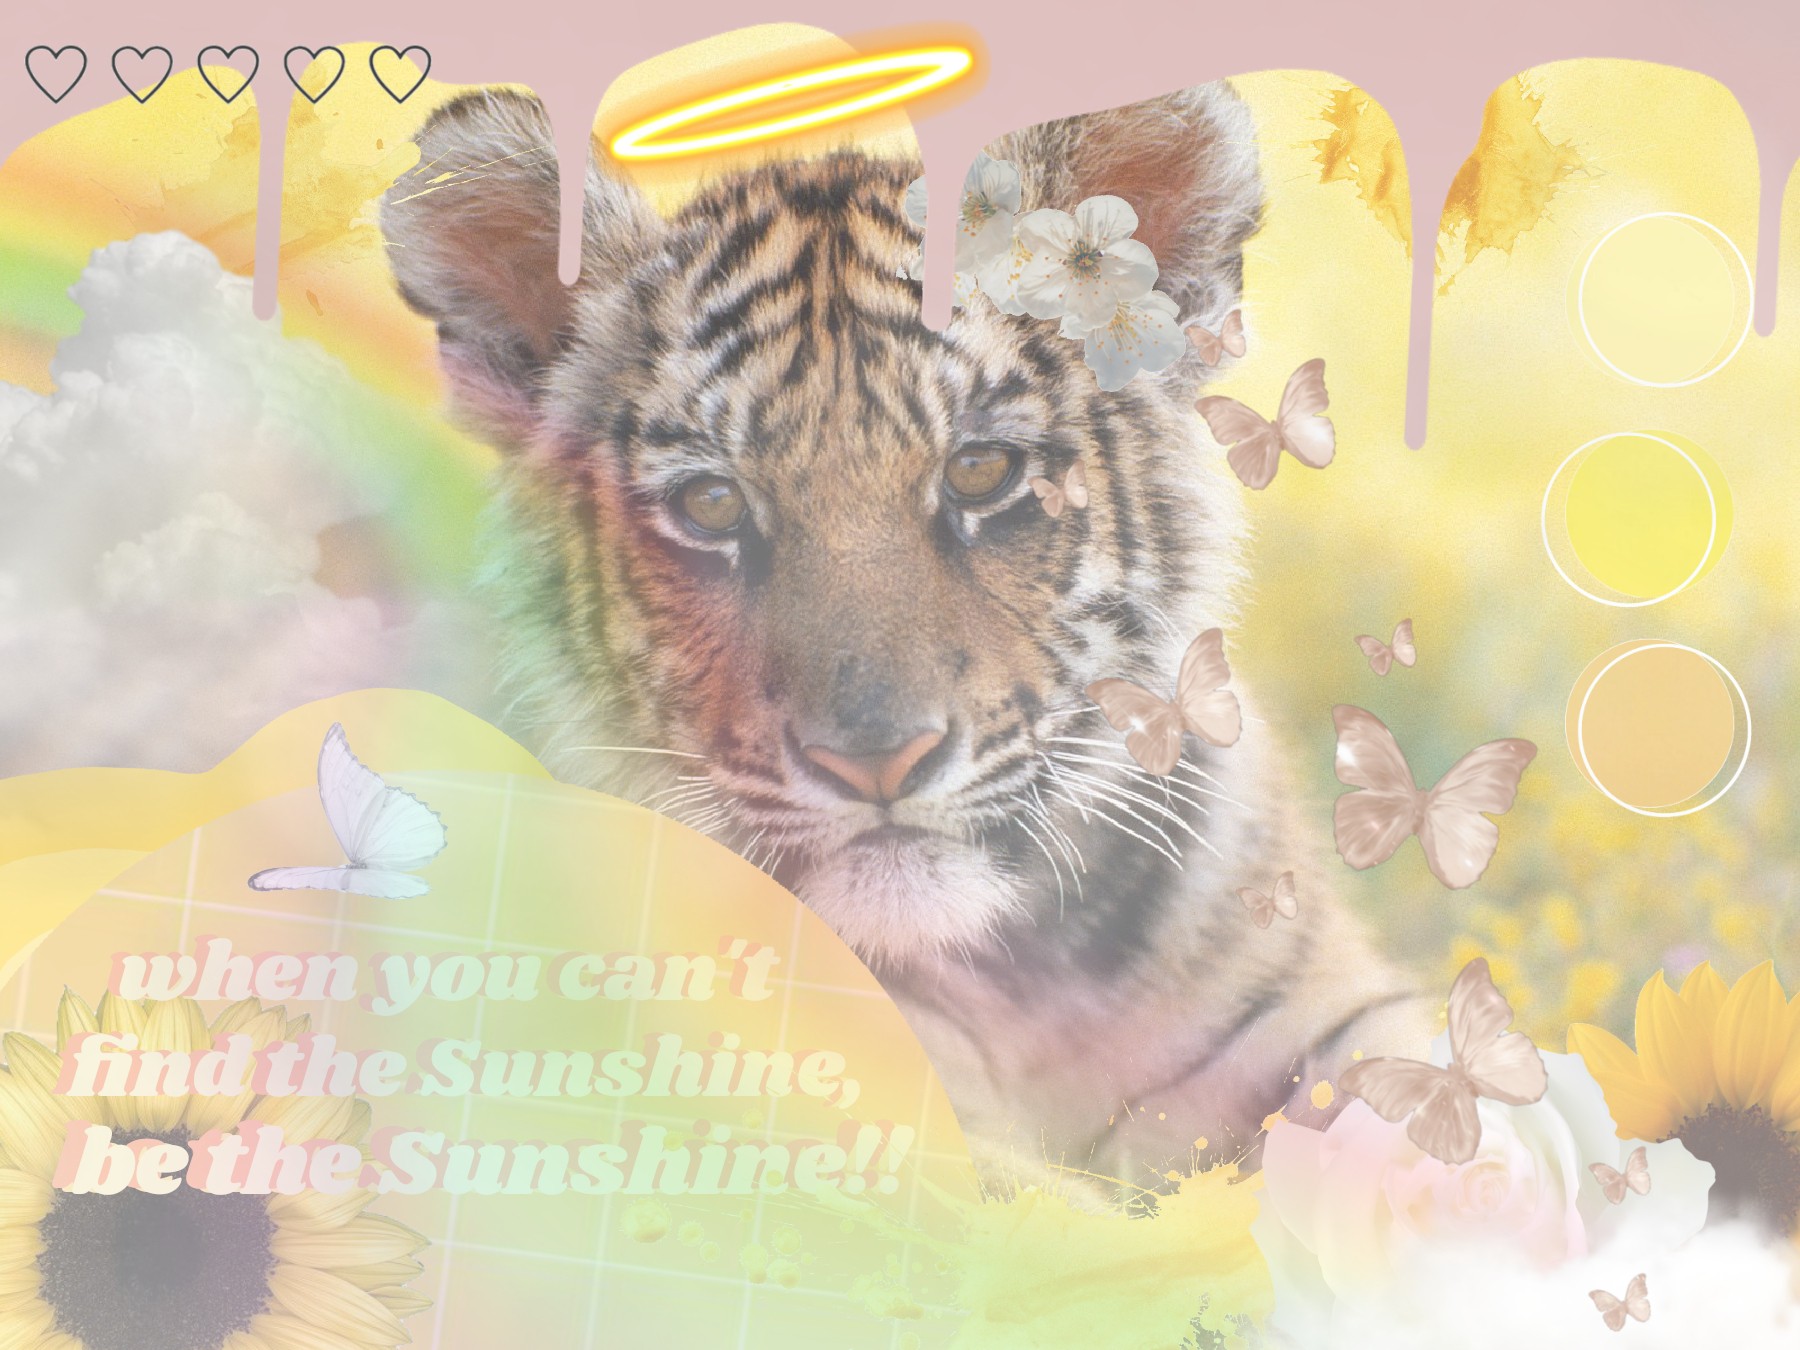 💛🐯🌻

Aesthetic Yellow Tiger Cub Collage

:3